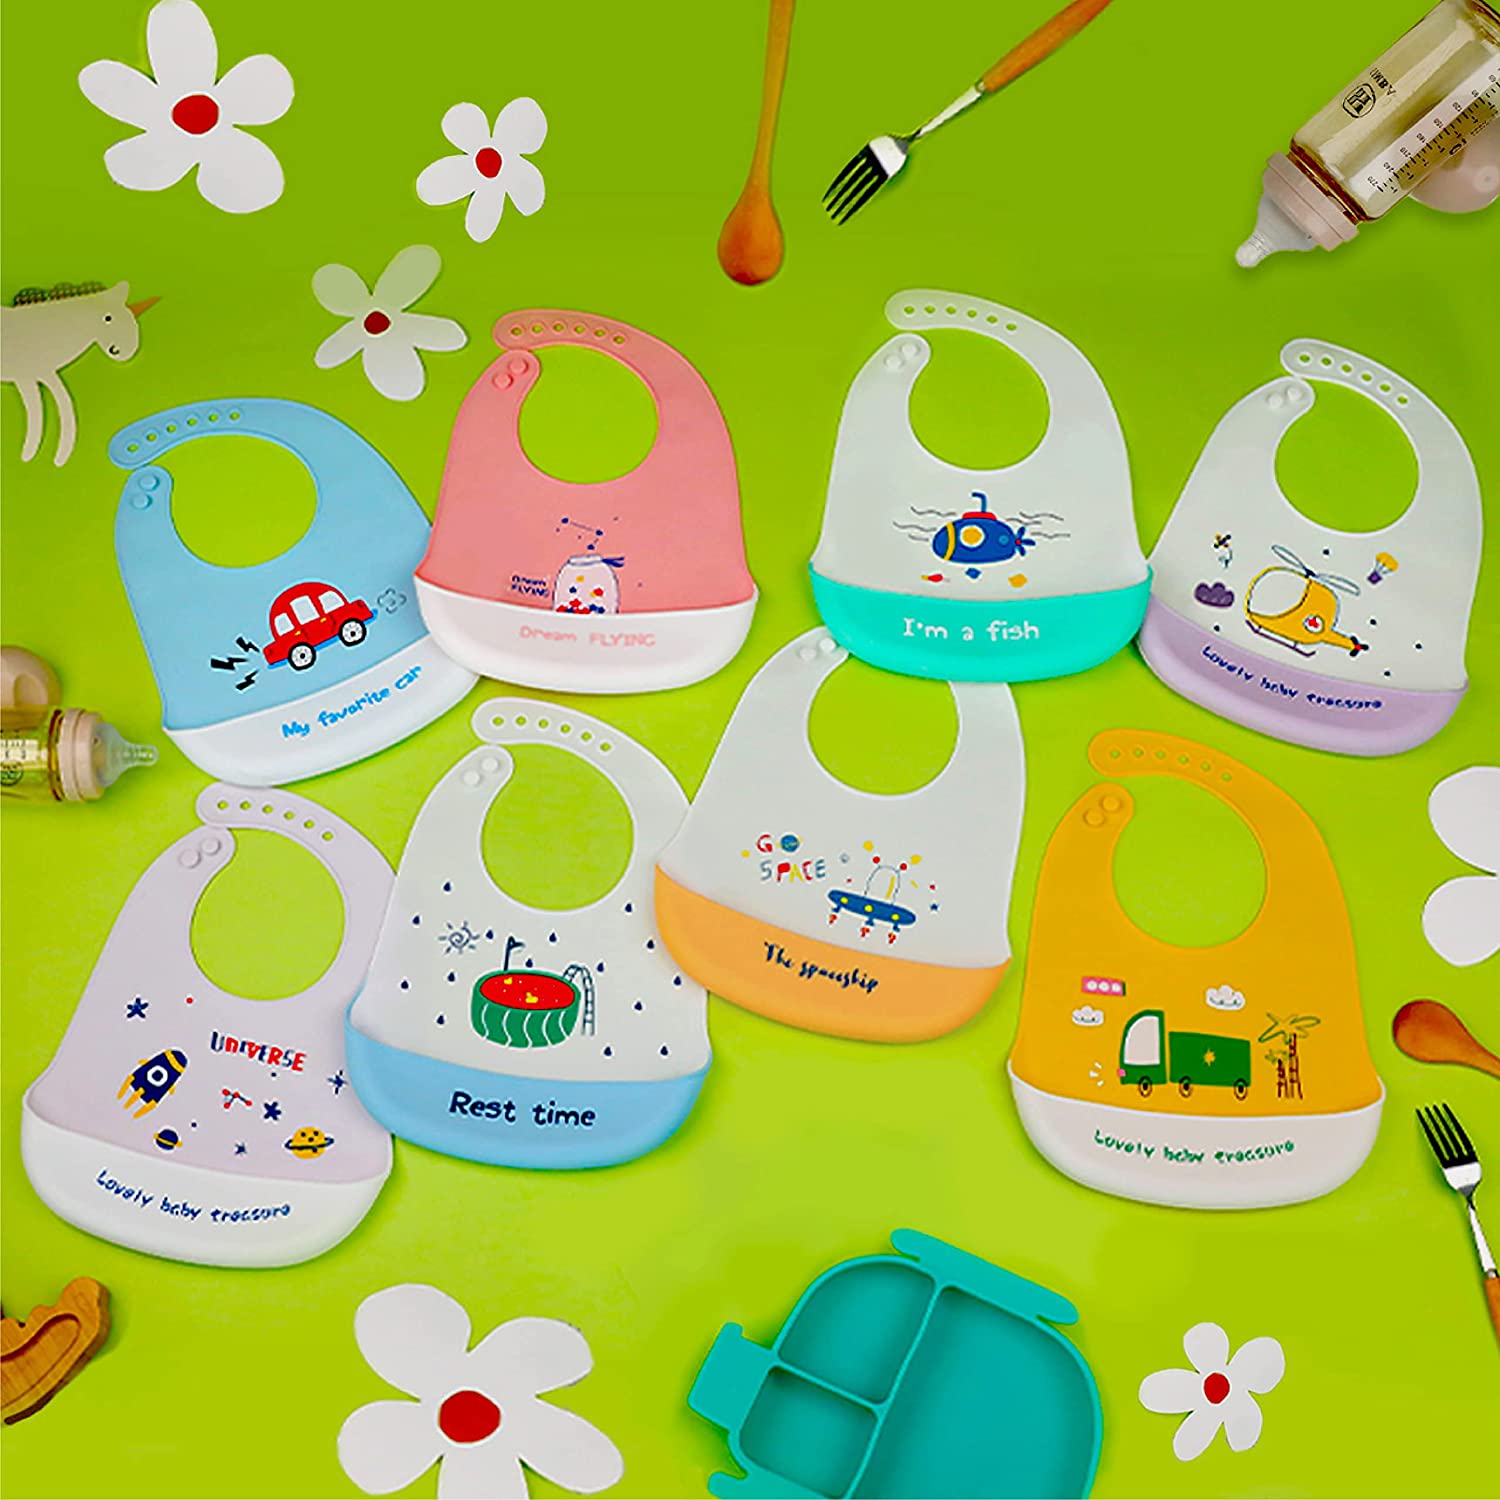 Silicone Bibs Contrast Color Collection| Waterproof Silicone Baby Bibs for Baby Feeding | Adjustable Fit Silicone Bibs